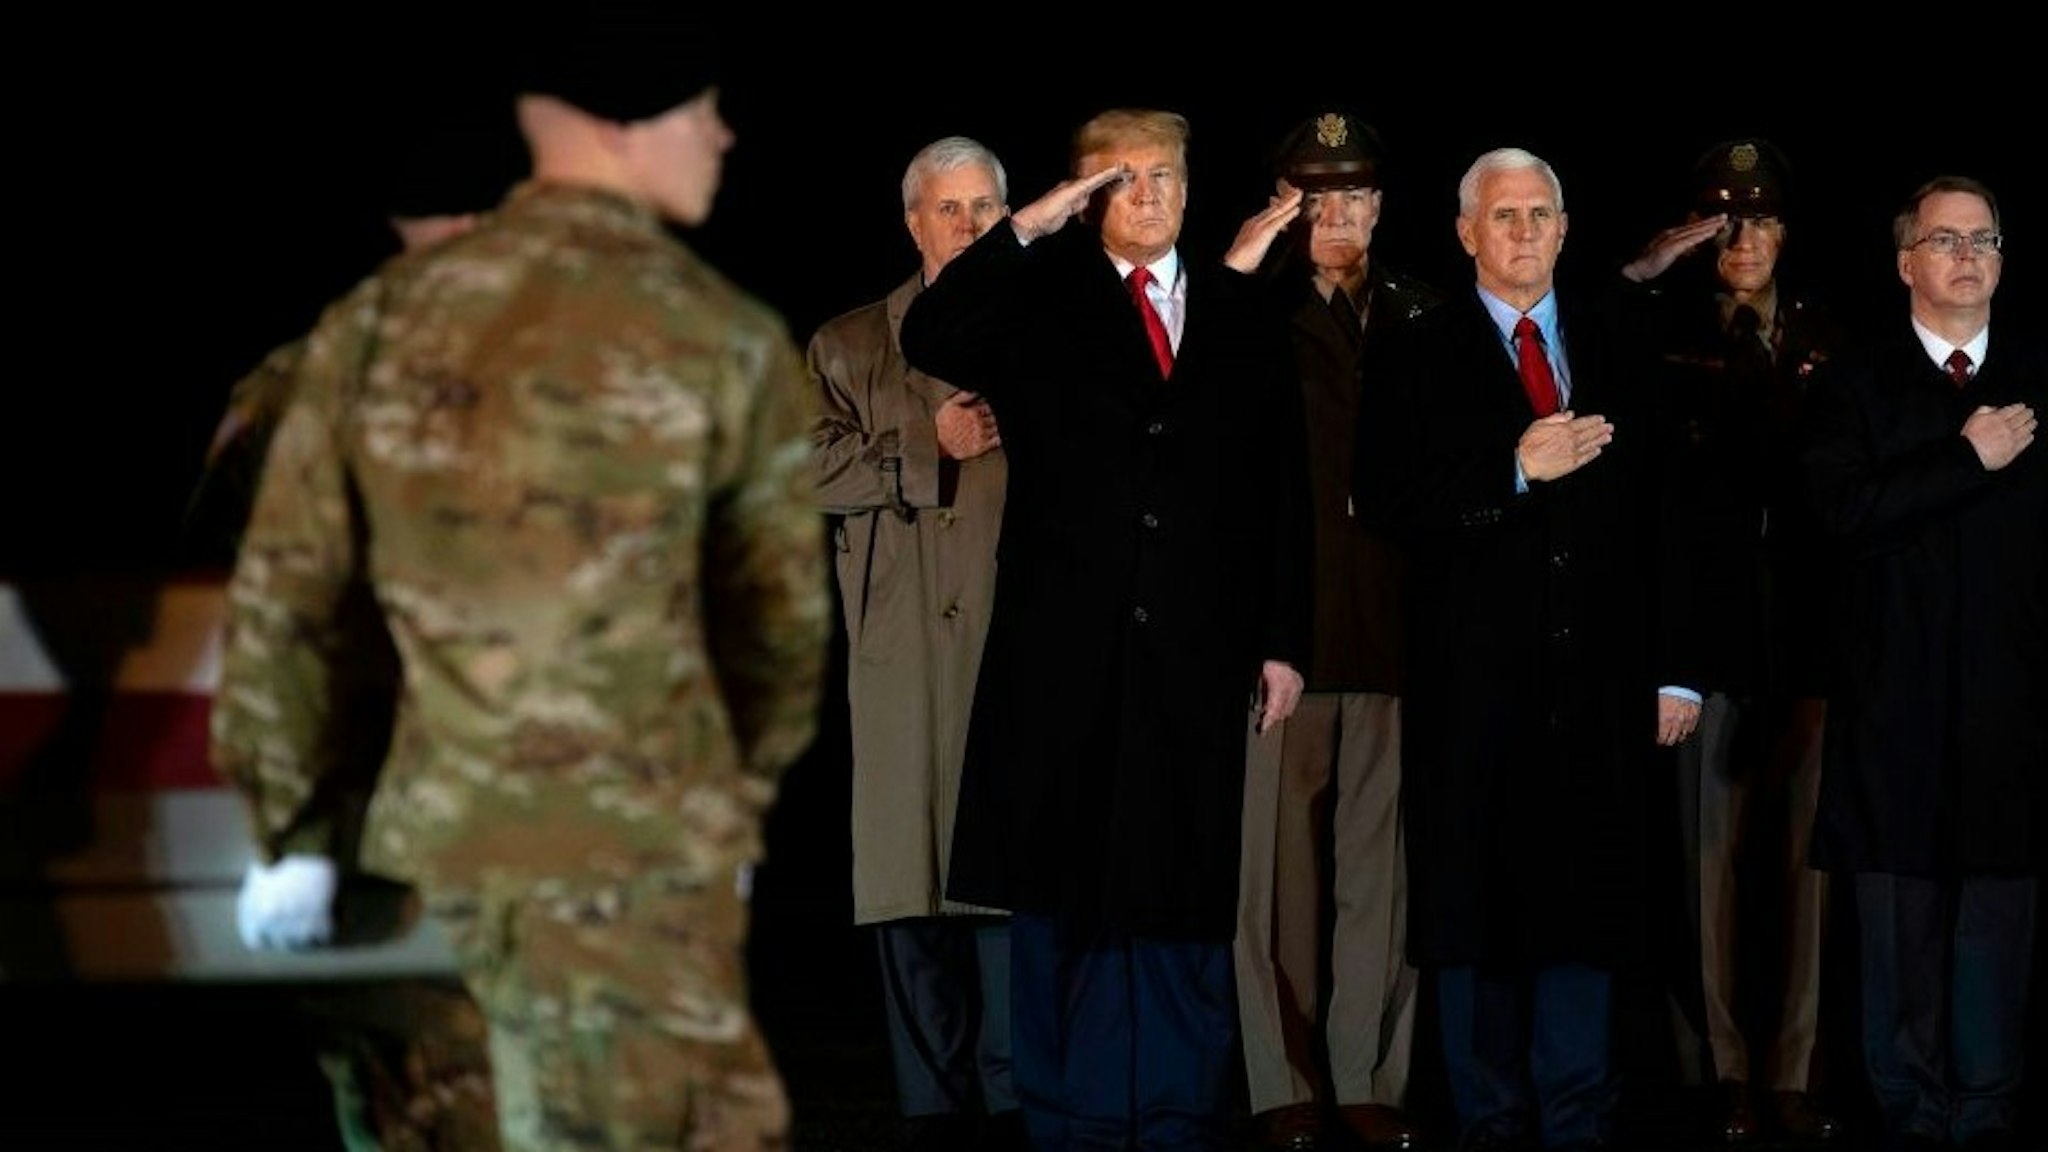 US President Donald Trump (L) and Vice President Mike Pence (C) observe the dignified transfer of two US soldiers, killed in Afghanistan, at Dover Air Force Base in Dover, Delaware, on February 10, 2020 with . - The two soldiers have been identified as Sgt. 1st Class Javier Jaguar Gutierrez, 28, of San Antonio, TX, and Sgt. 1st Class Anonio Rey Rodriguez, 28, of Las Cruces, New Mexico. US and Afghan troops came under "direct fire" in eastern Afghanistan late on February 8, a US military official said. (Photo by JIM WATSON / AFP) (Photo by